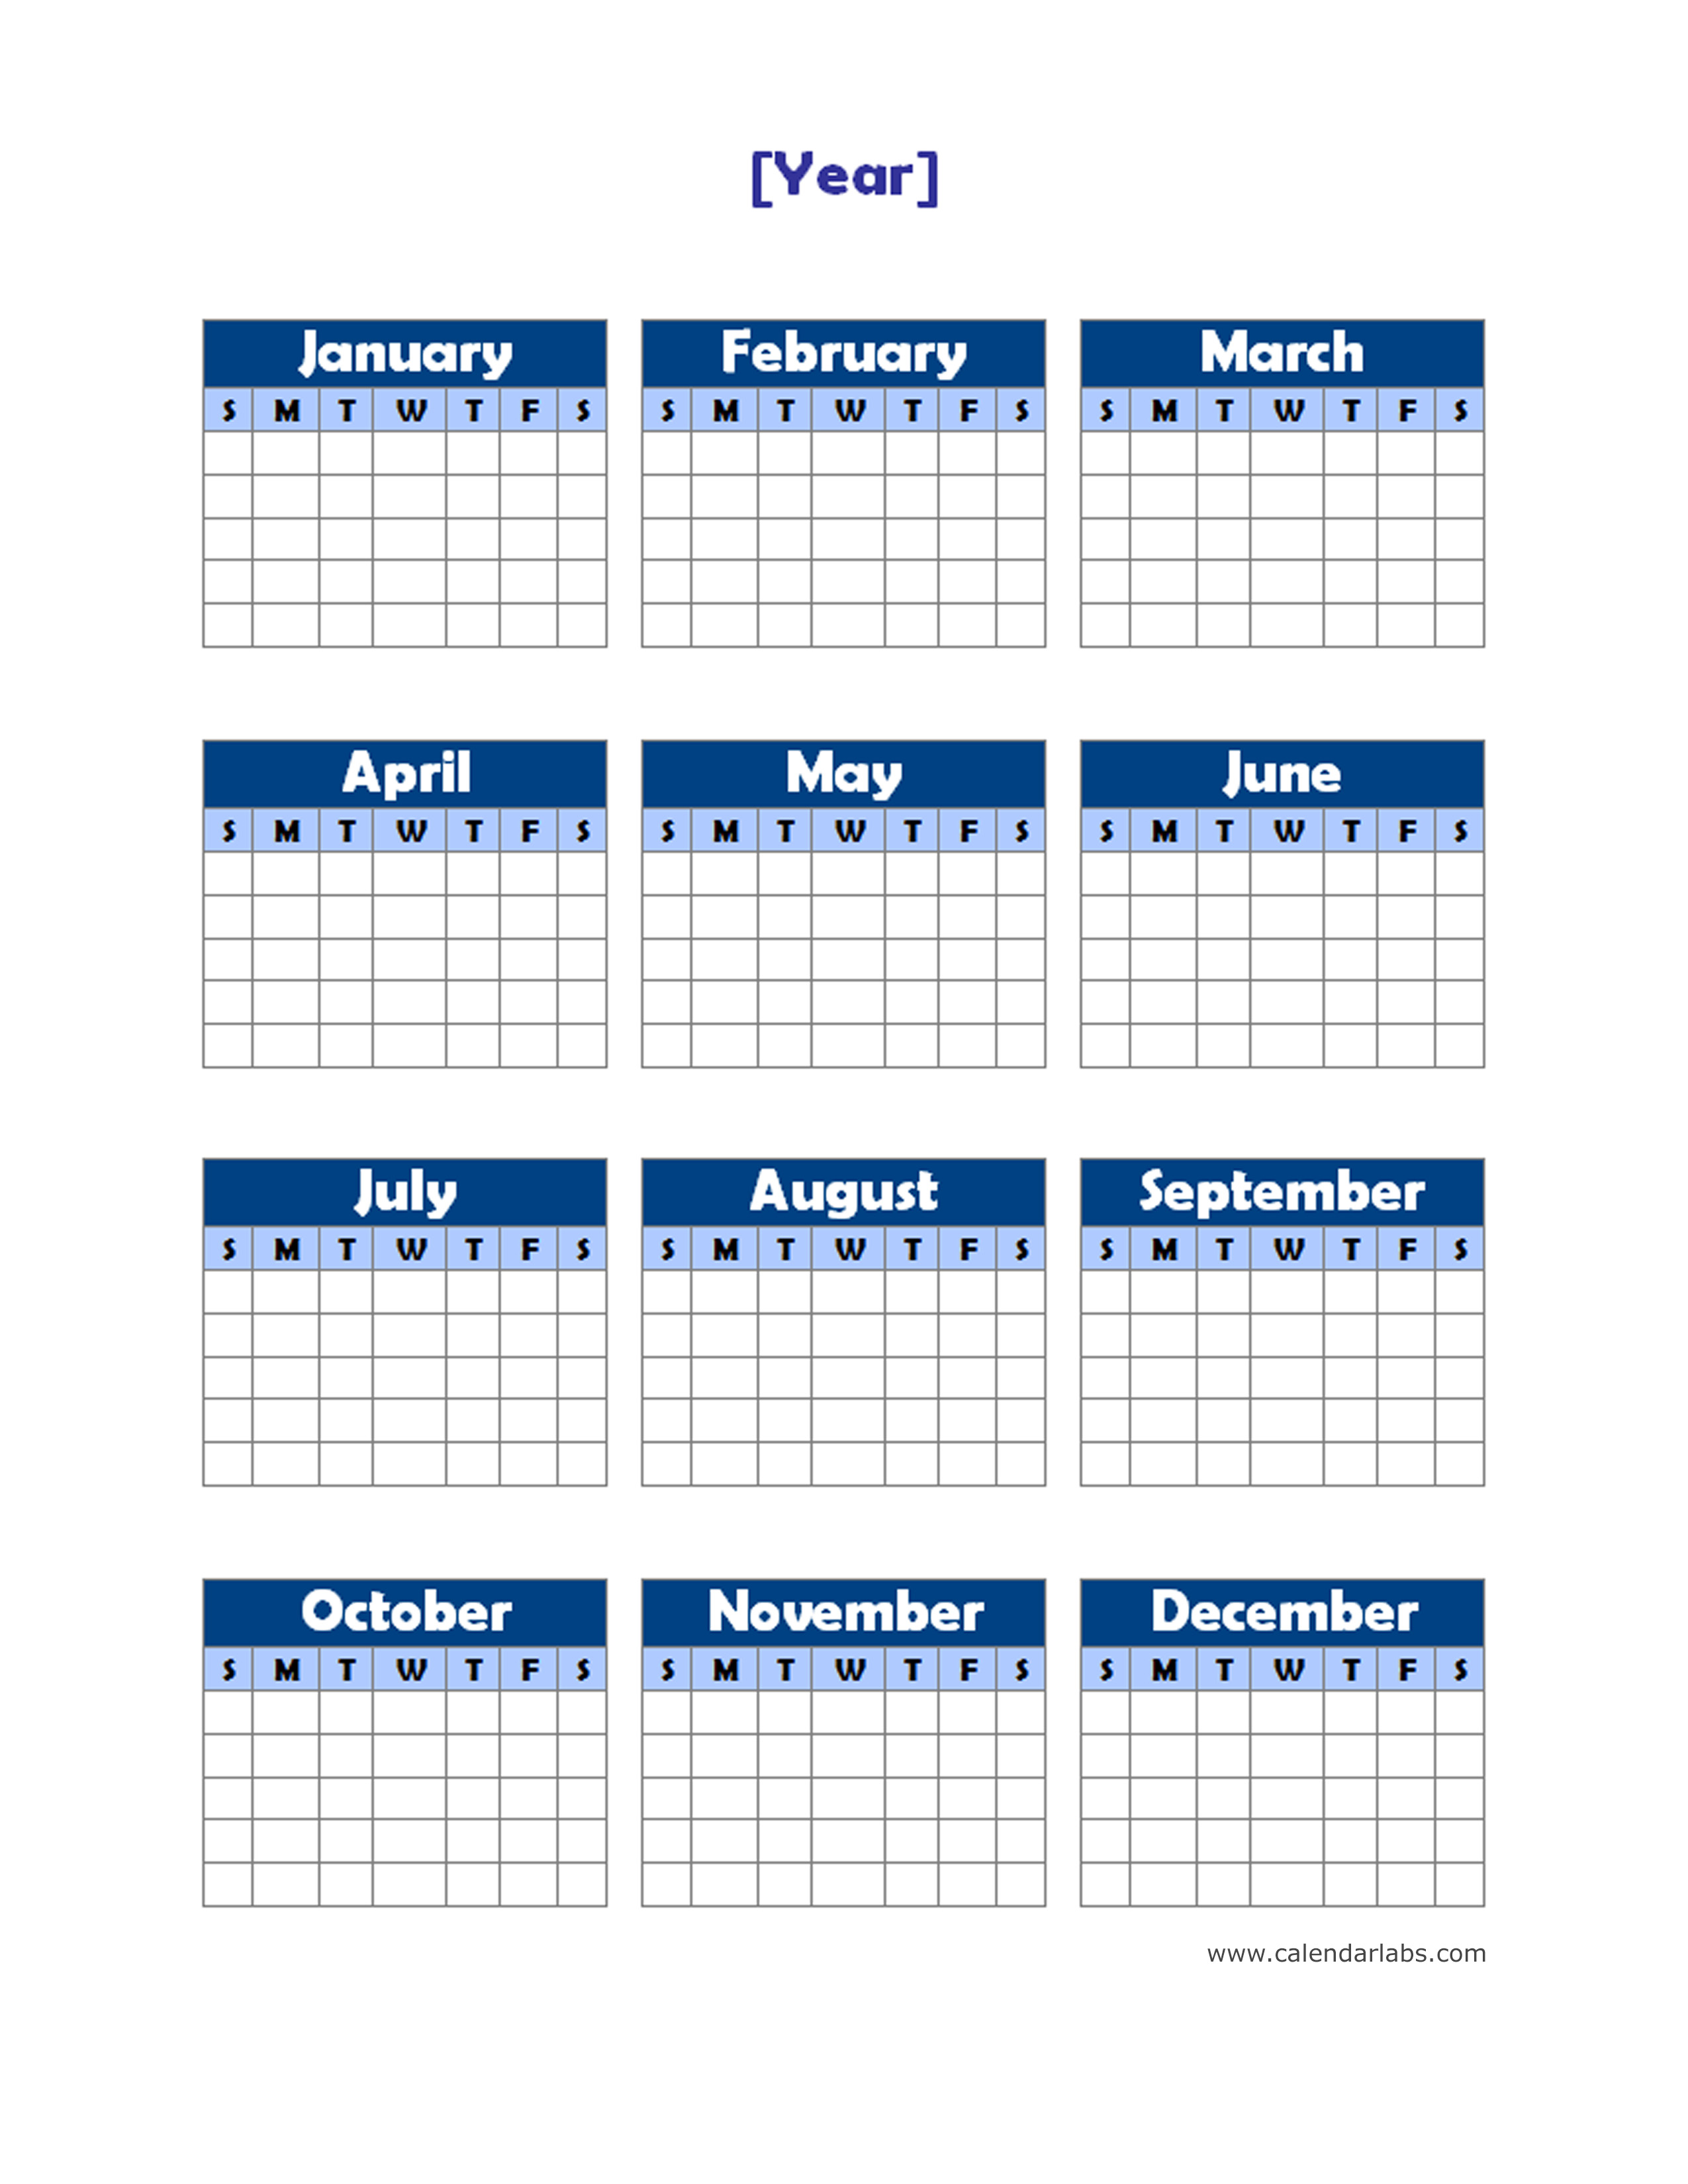 yearly-calendar-template-for-2016-and-beyond